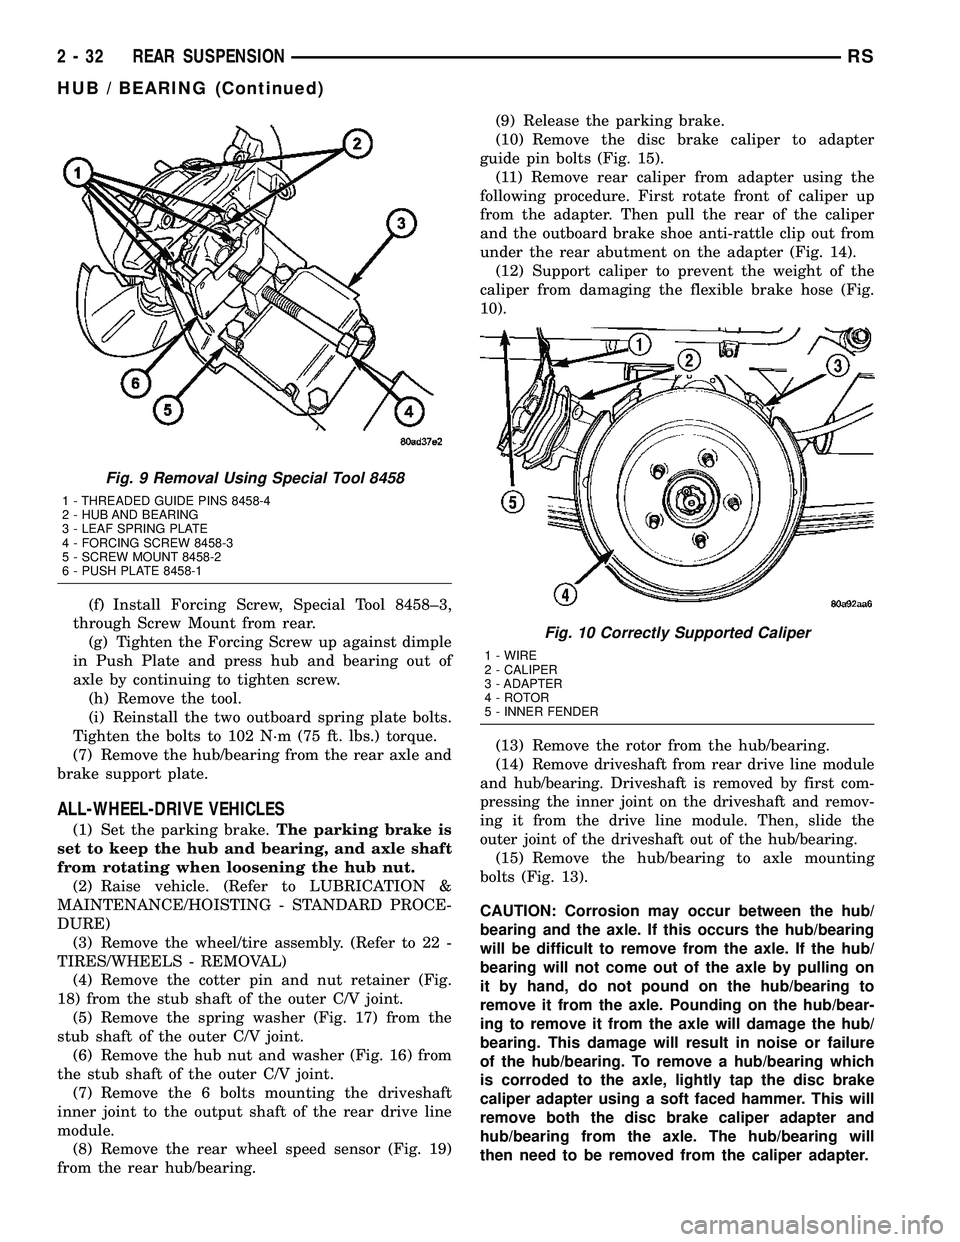 CHRYSLER CARAVAN 2005  Service Manual (f) Install Forcing Screw, Special Tool 8458±3,
through Screw Mount from rear.
(g) Tighten the Forcing Screw up against dimple
in Push Plate and press hub and bearing out of
axle by continuing to tig